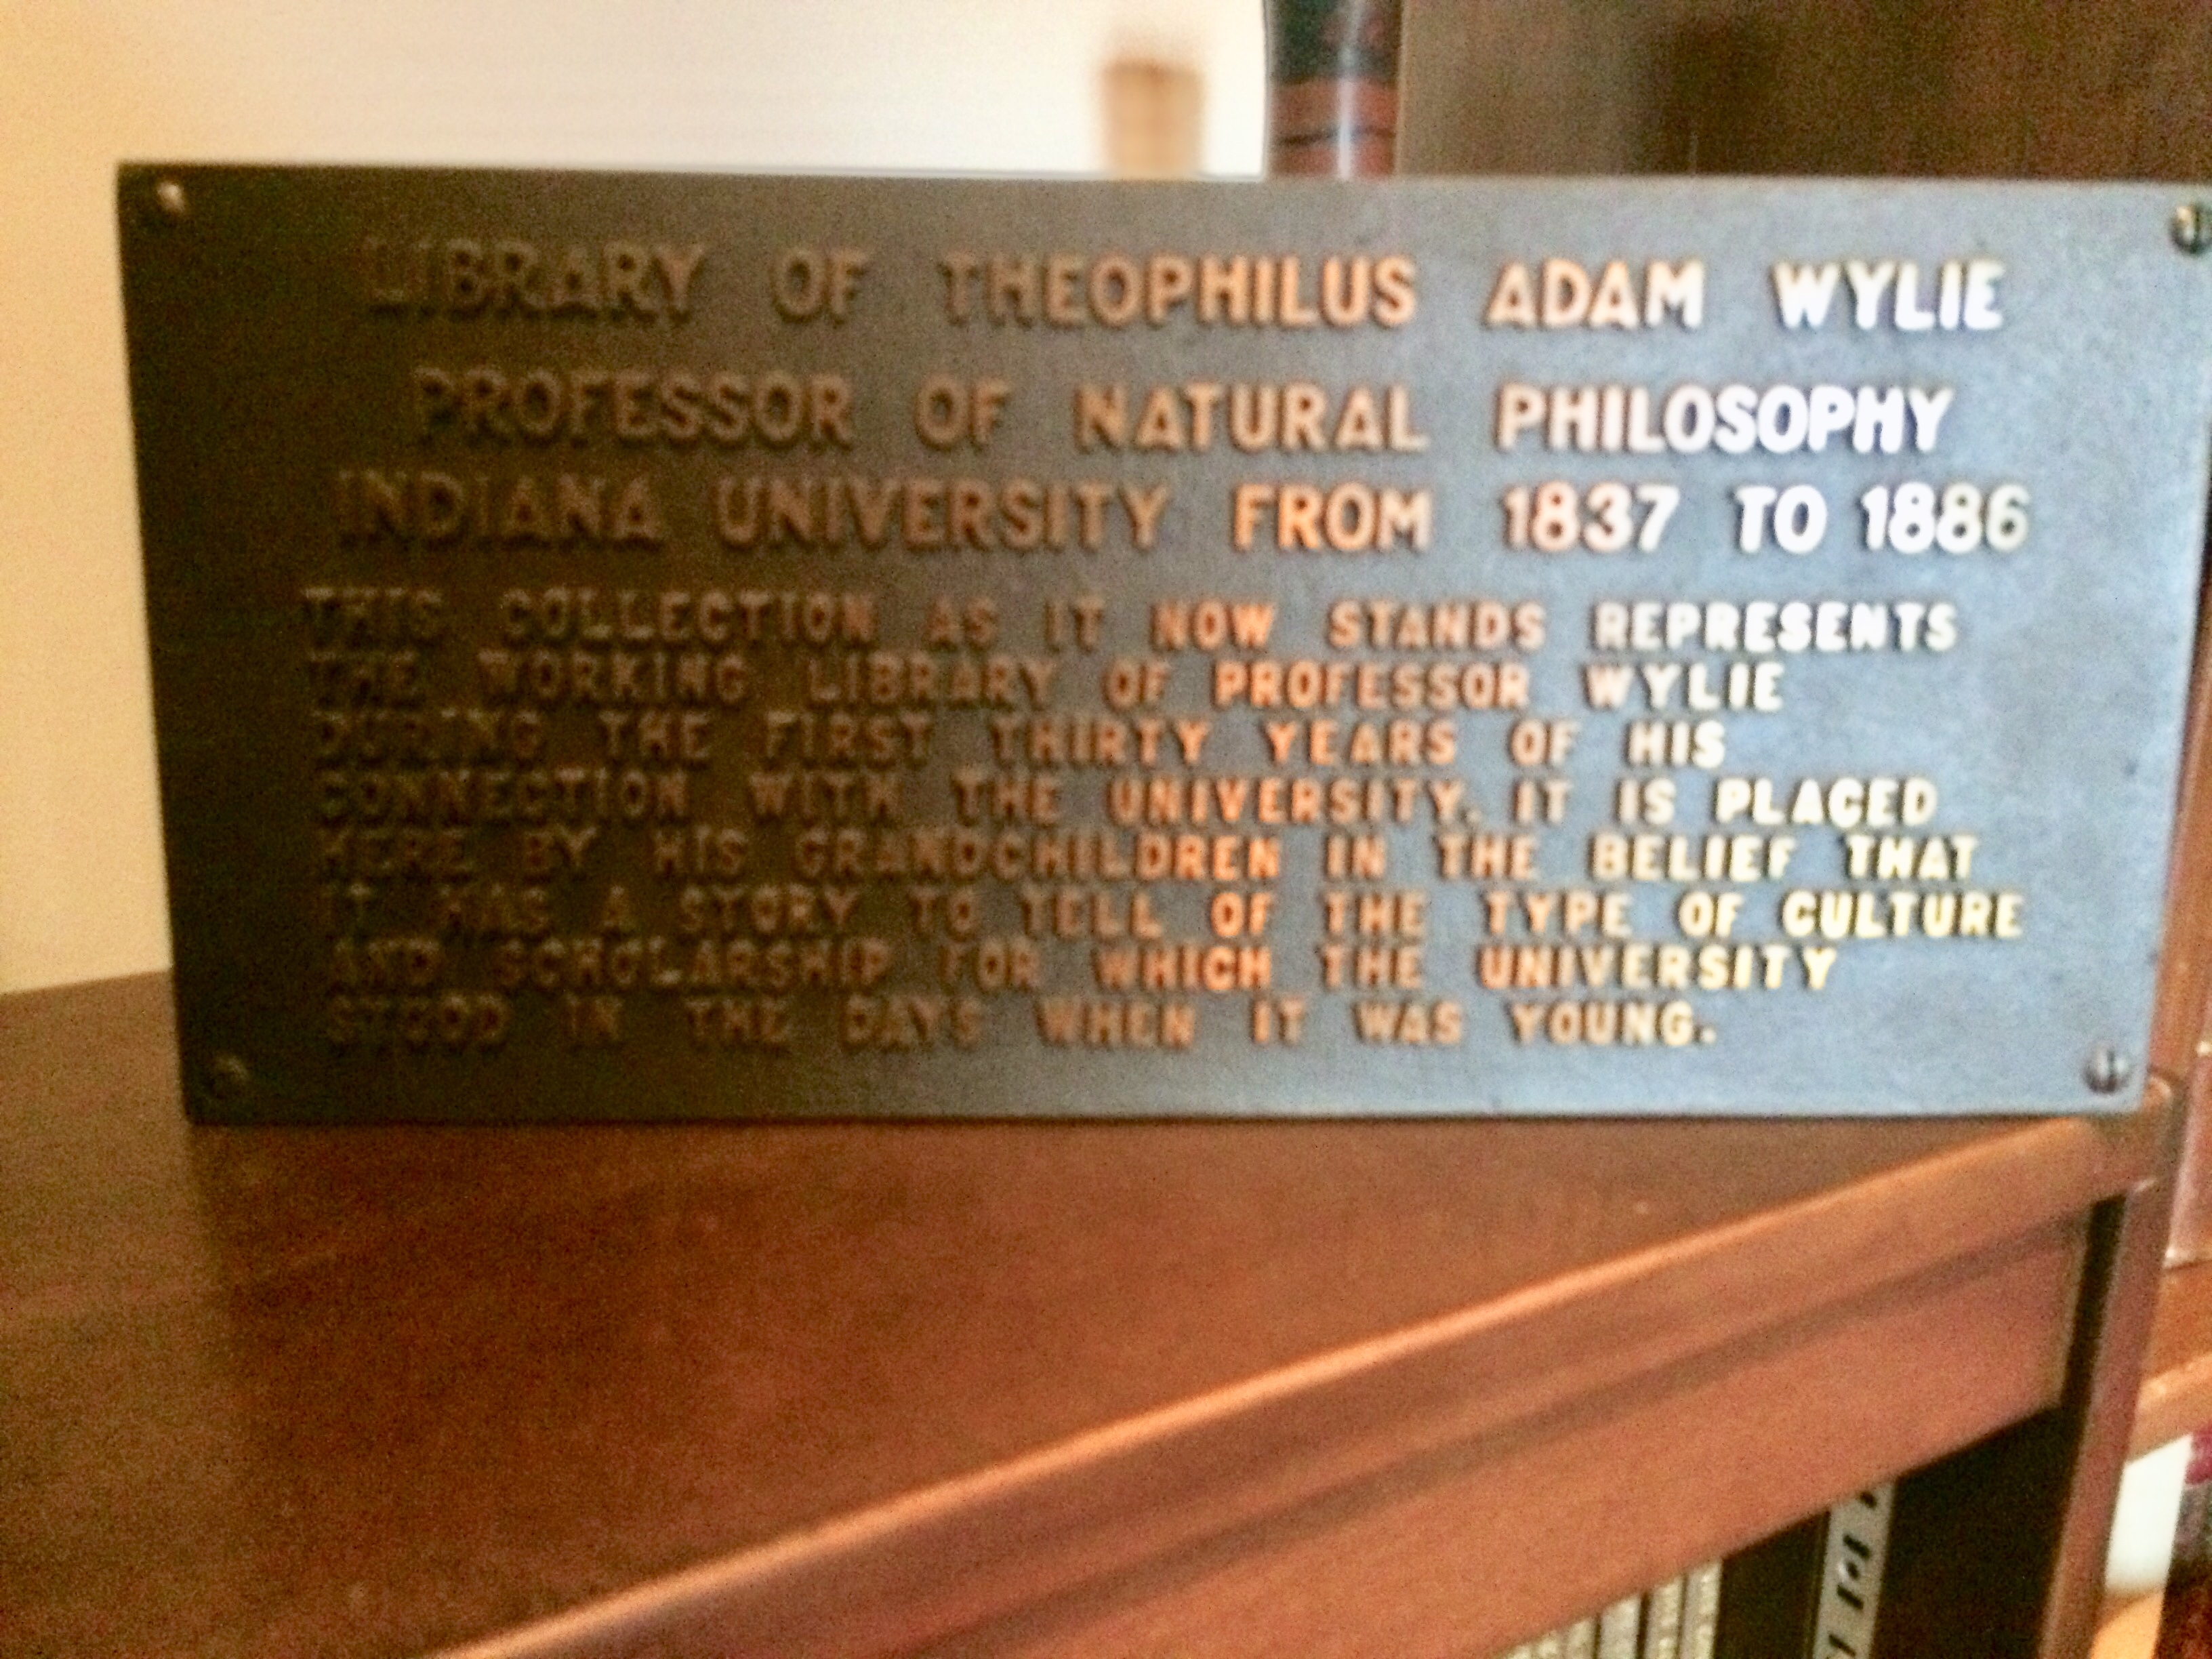 plaque stating "library of Theophilus Adam Wylie Professor of Natural Philosophy Indiana University from 1837 to 1886